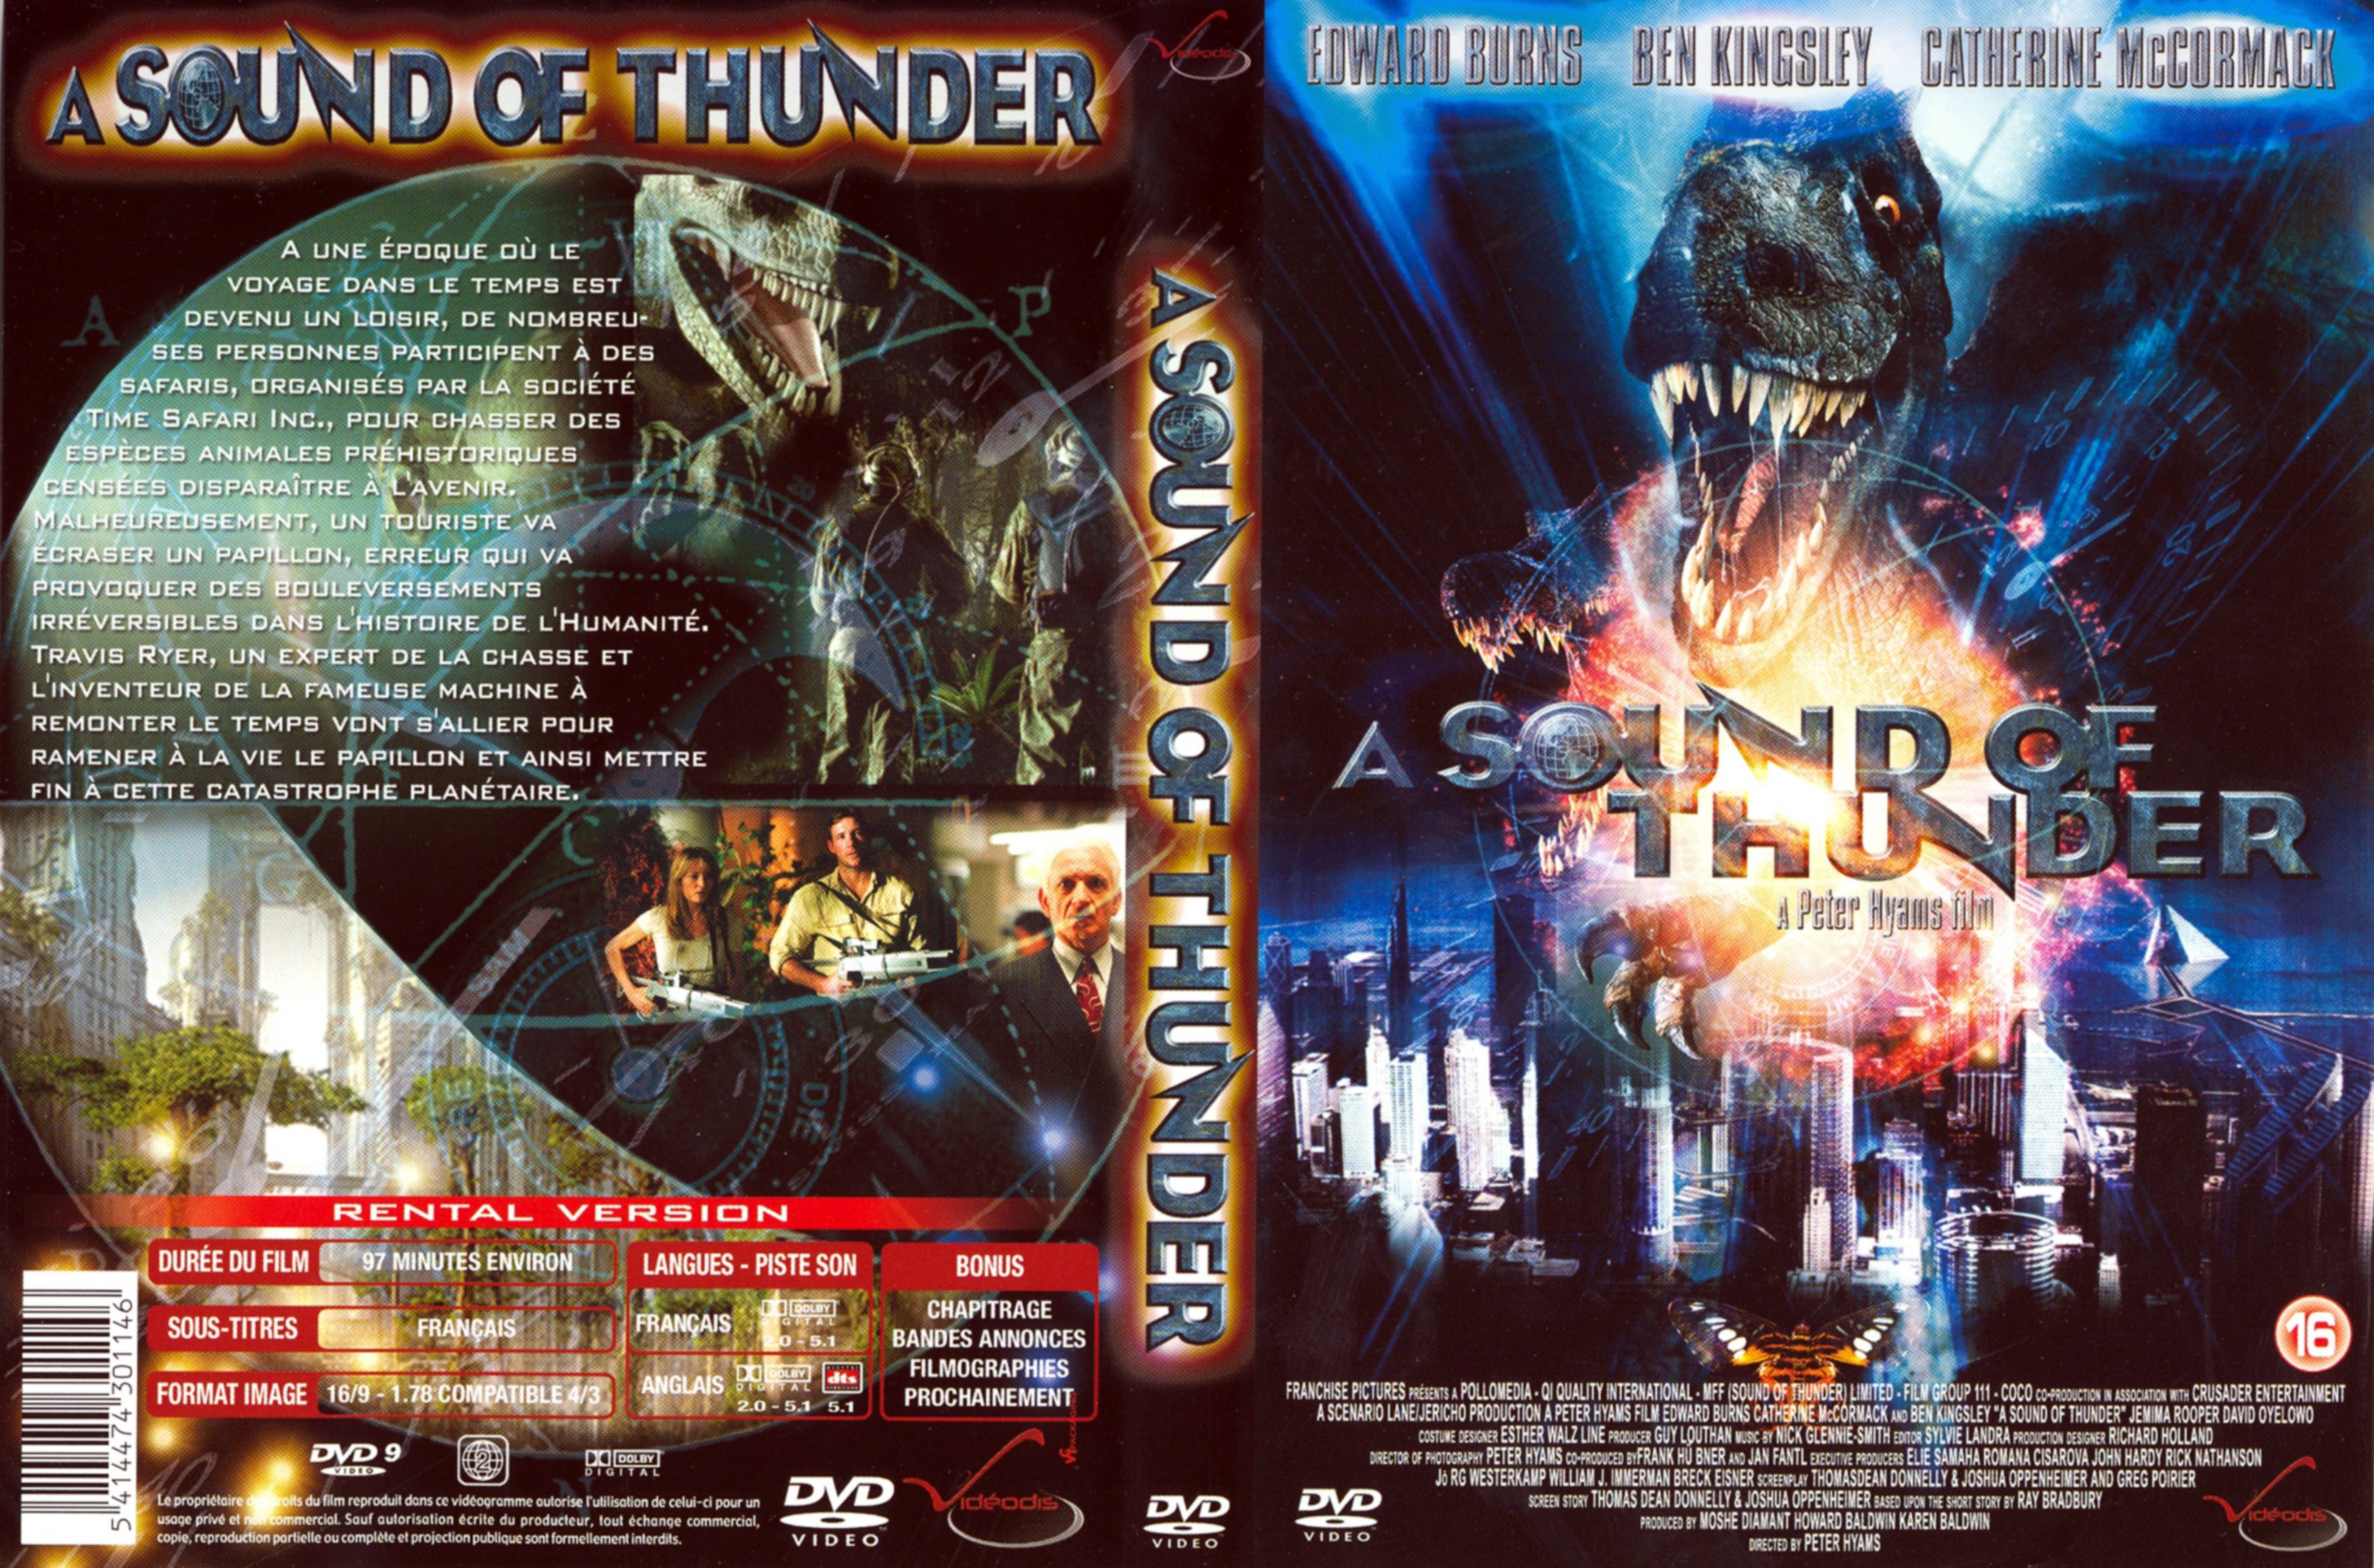 Jaquette DVD A sound of thunder